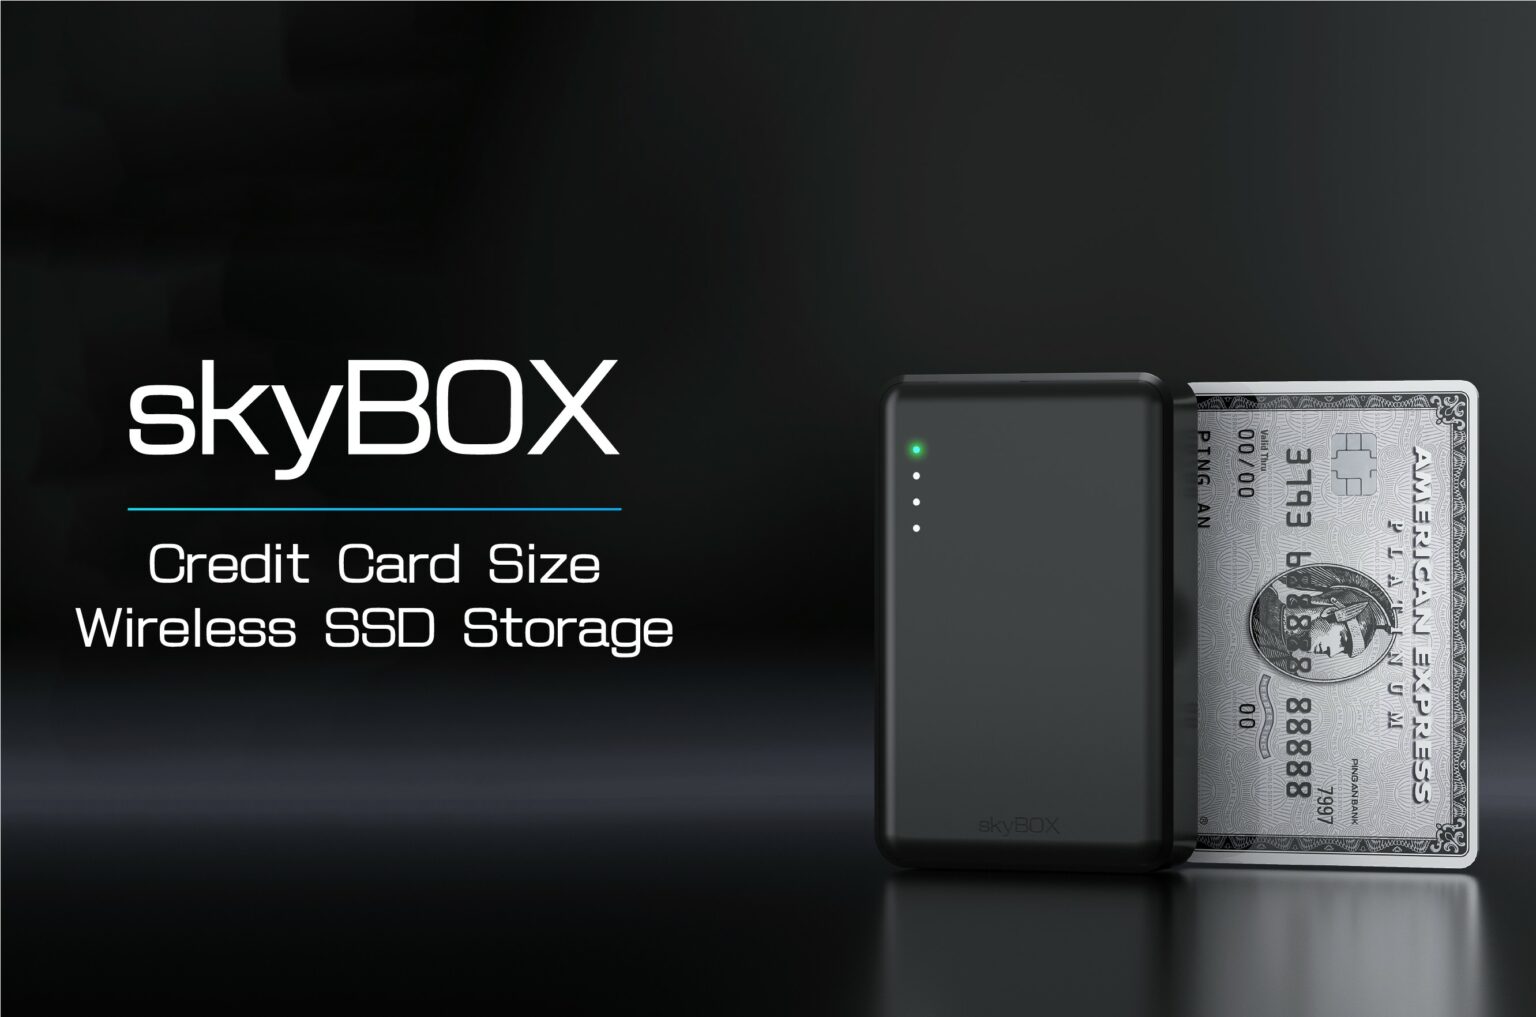 HyperAccessory's skyBOX SSD storage device lets you take your streaming and sharing on the go.